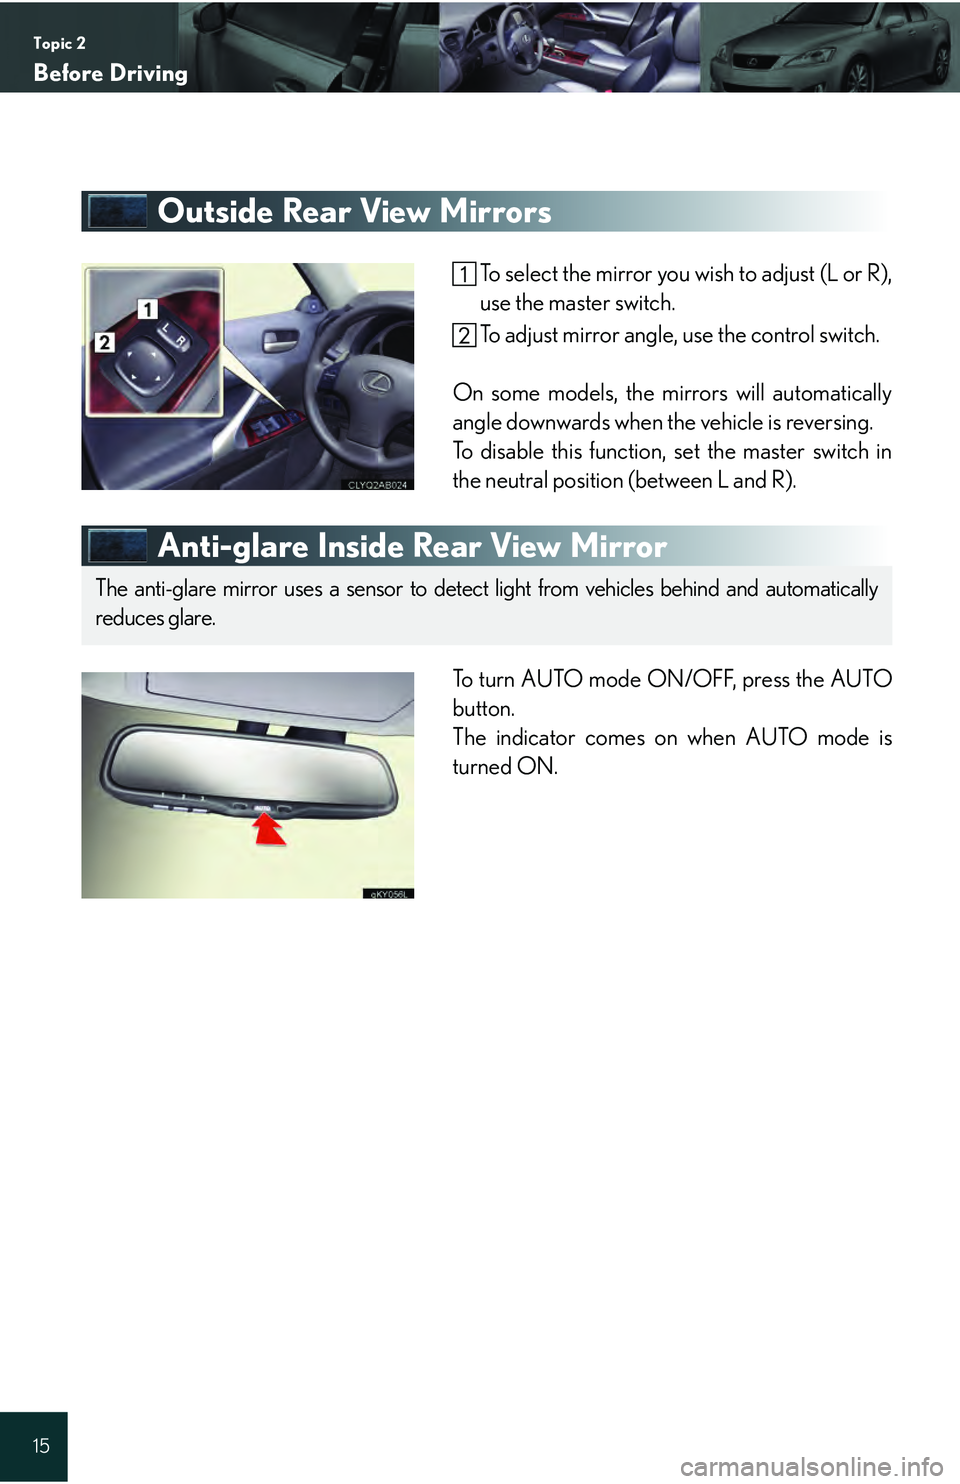 Lexus IS250 2009  Using the audio system / LEXUS 2009 IS350/250 QUICK GUIDE OWNERS MANUAL (OM53689U) Topic 2
Before Driving
15
Outside Rear View Mirrors
To select the mirror you wish to adjust (L or R),
use the master switch.
To adjust mirror angle, use the control switch.
On some models, the mirrors